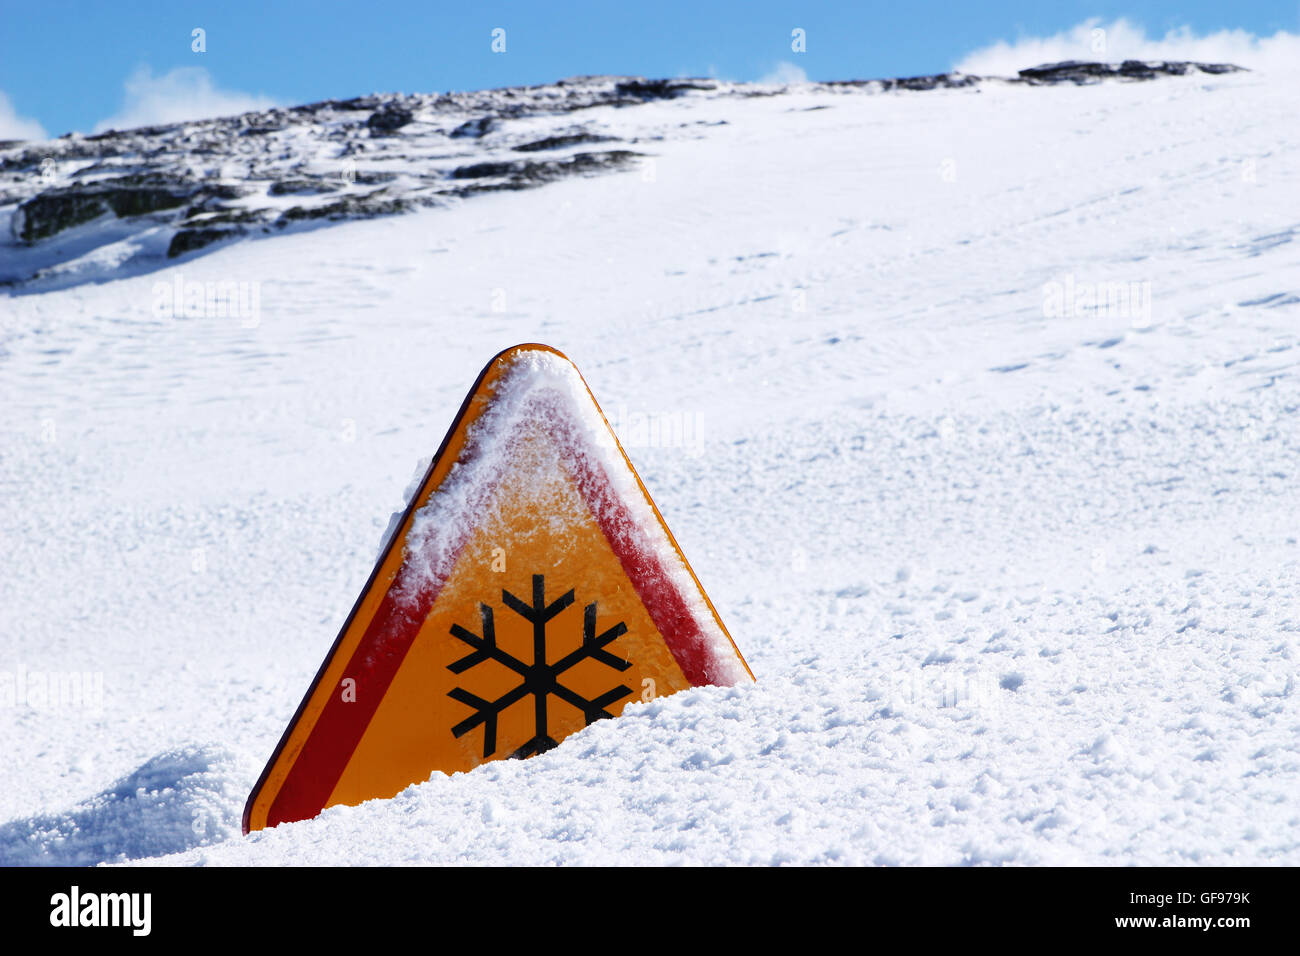 snow danger sign covered in snow Stock Photo